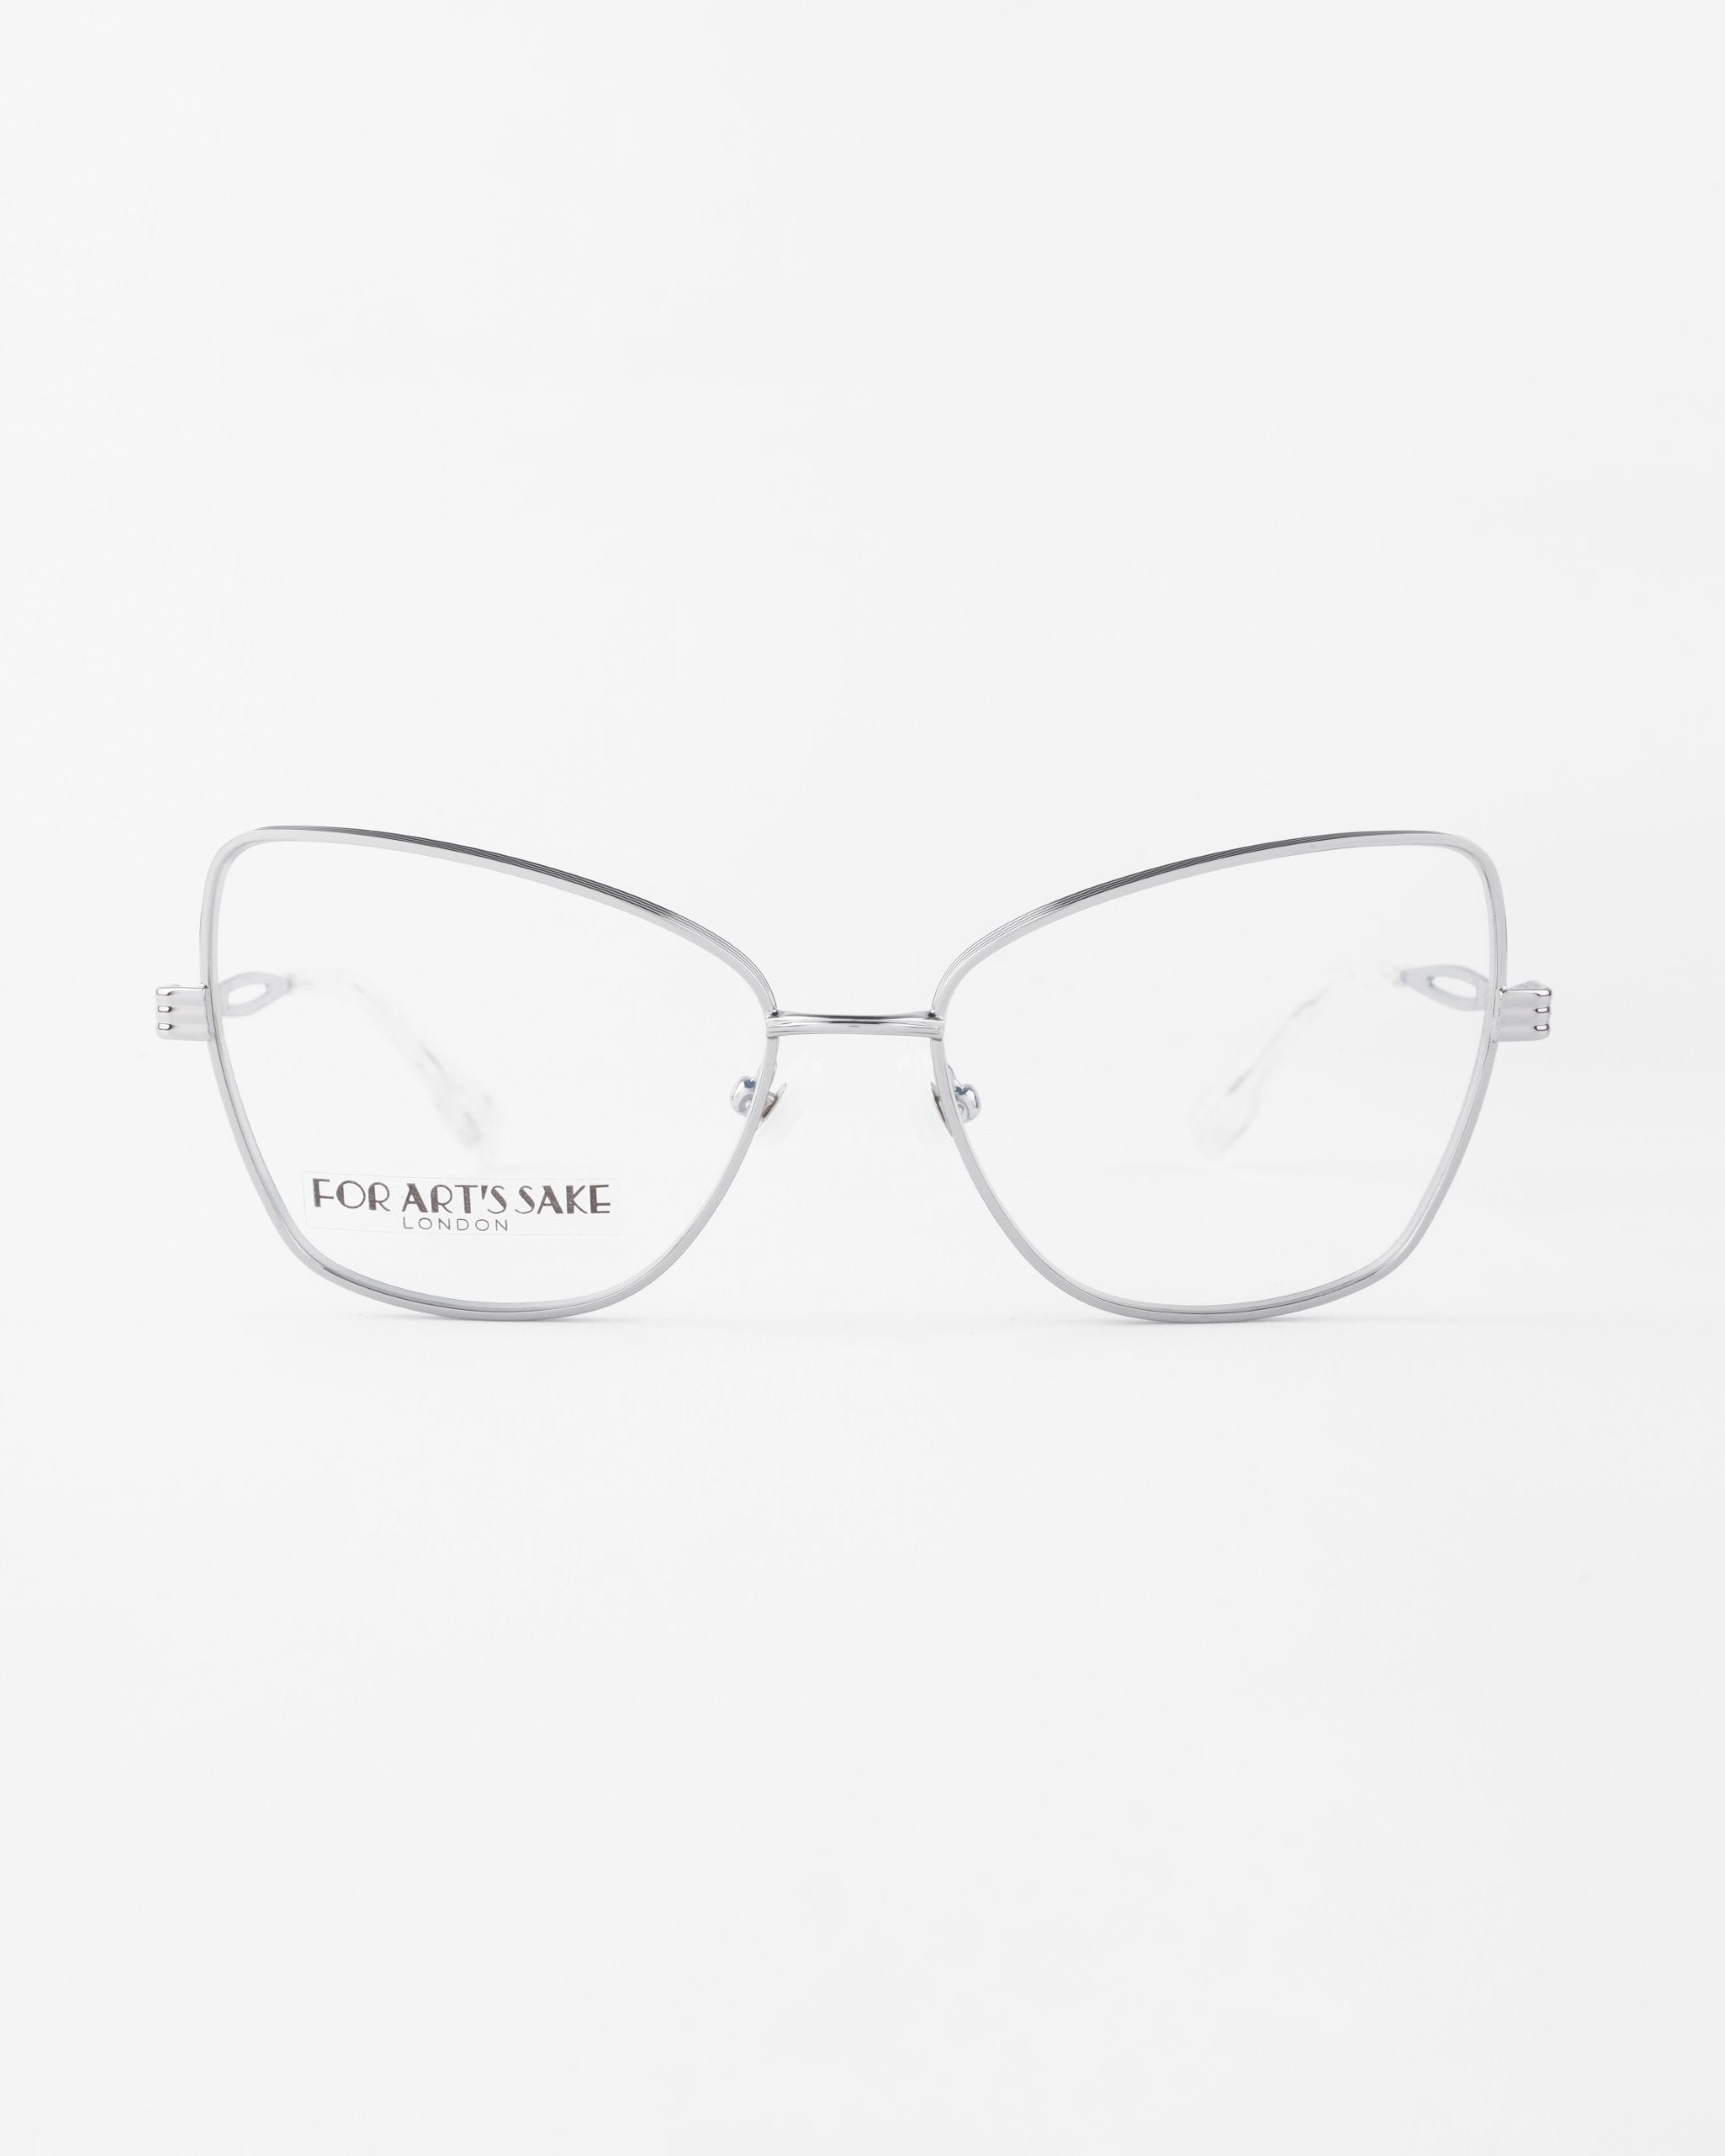 Clear cat-eye eyeglasses with thin, silver metal frames and the phrase "FOR ART'S SAKE LONDON" inscribed on the left lens. Featuring prescription lenses, these chic Lady by For Art's Sake® glasses are set against a plain white background.